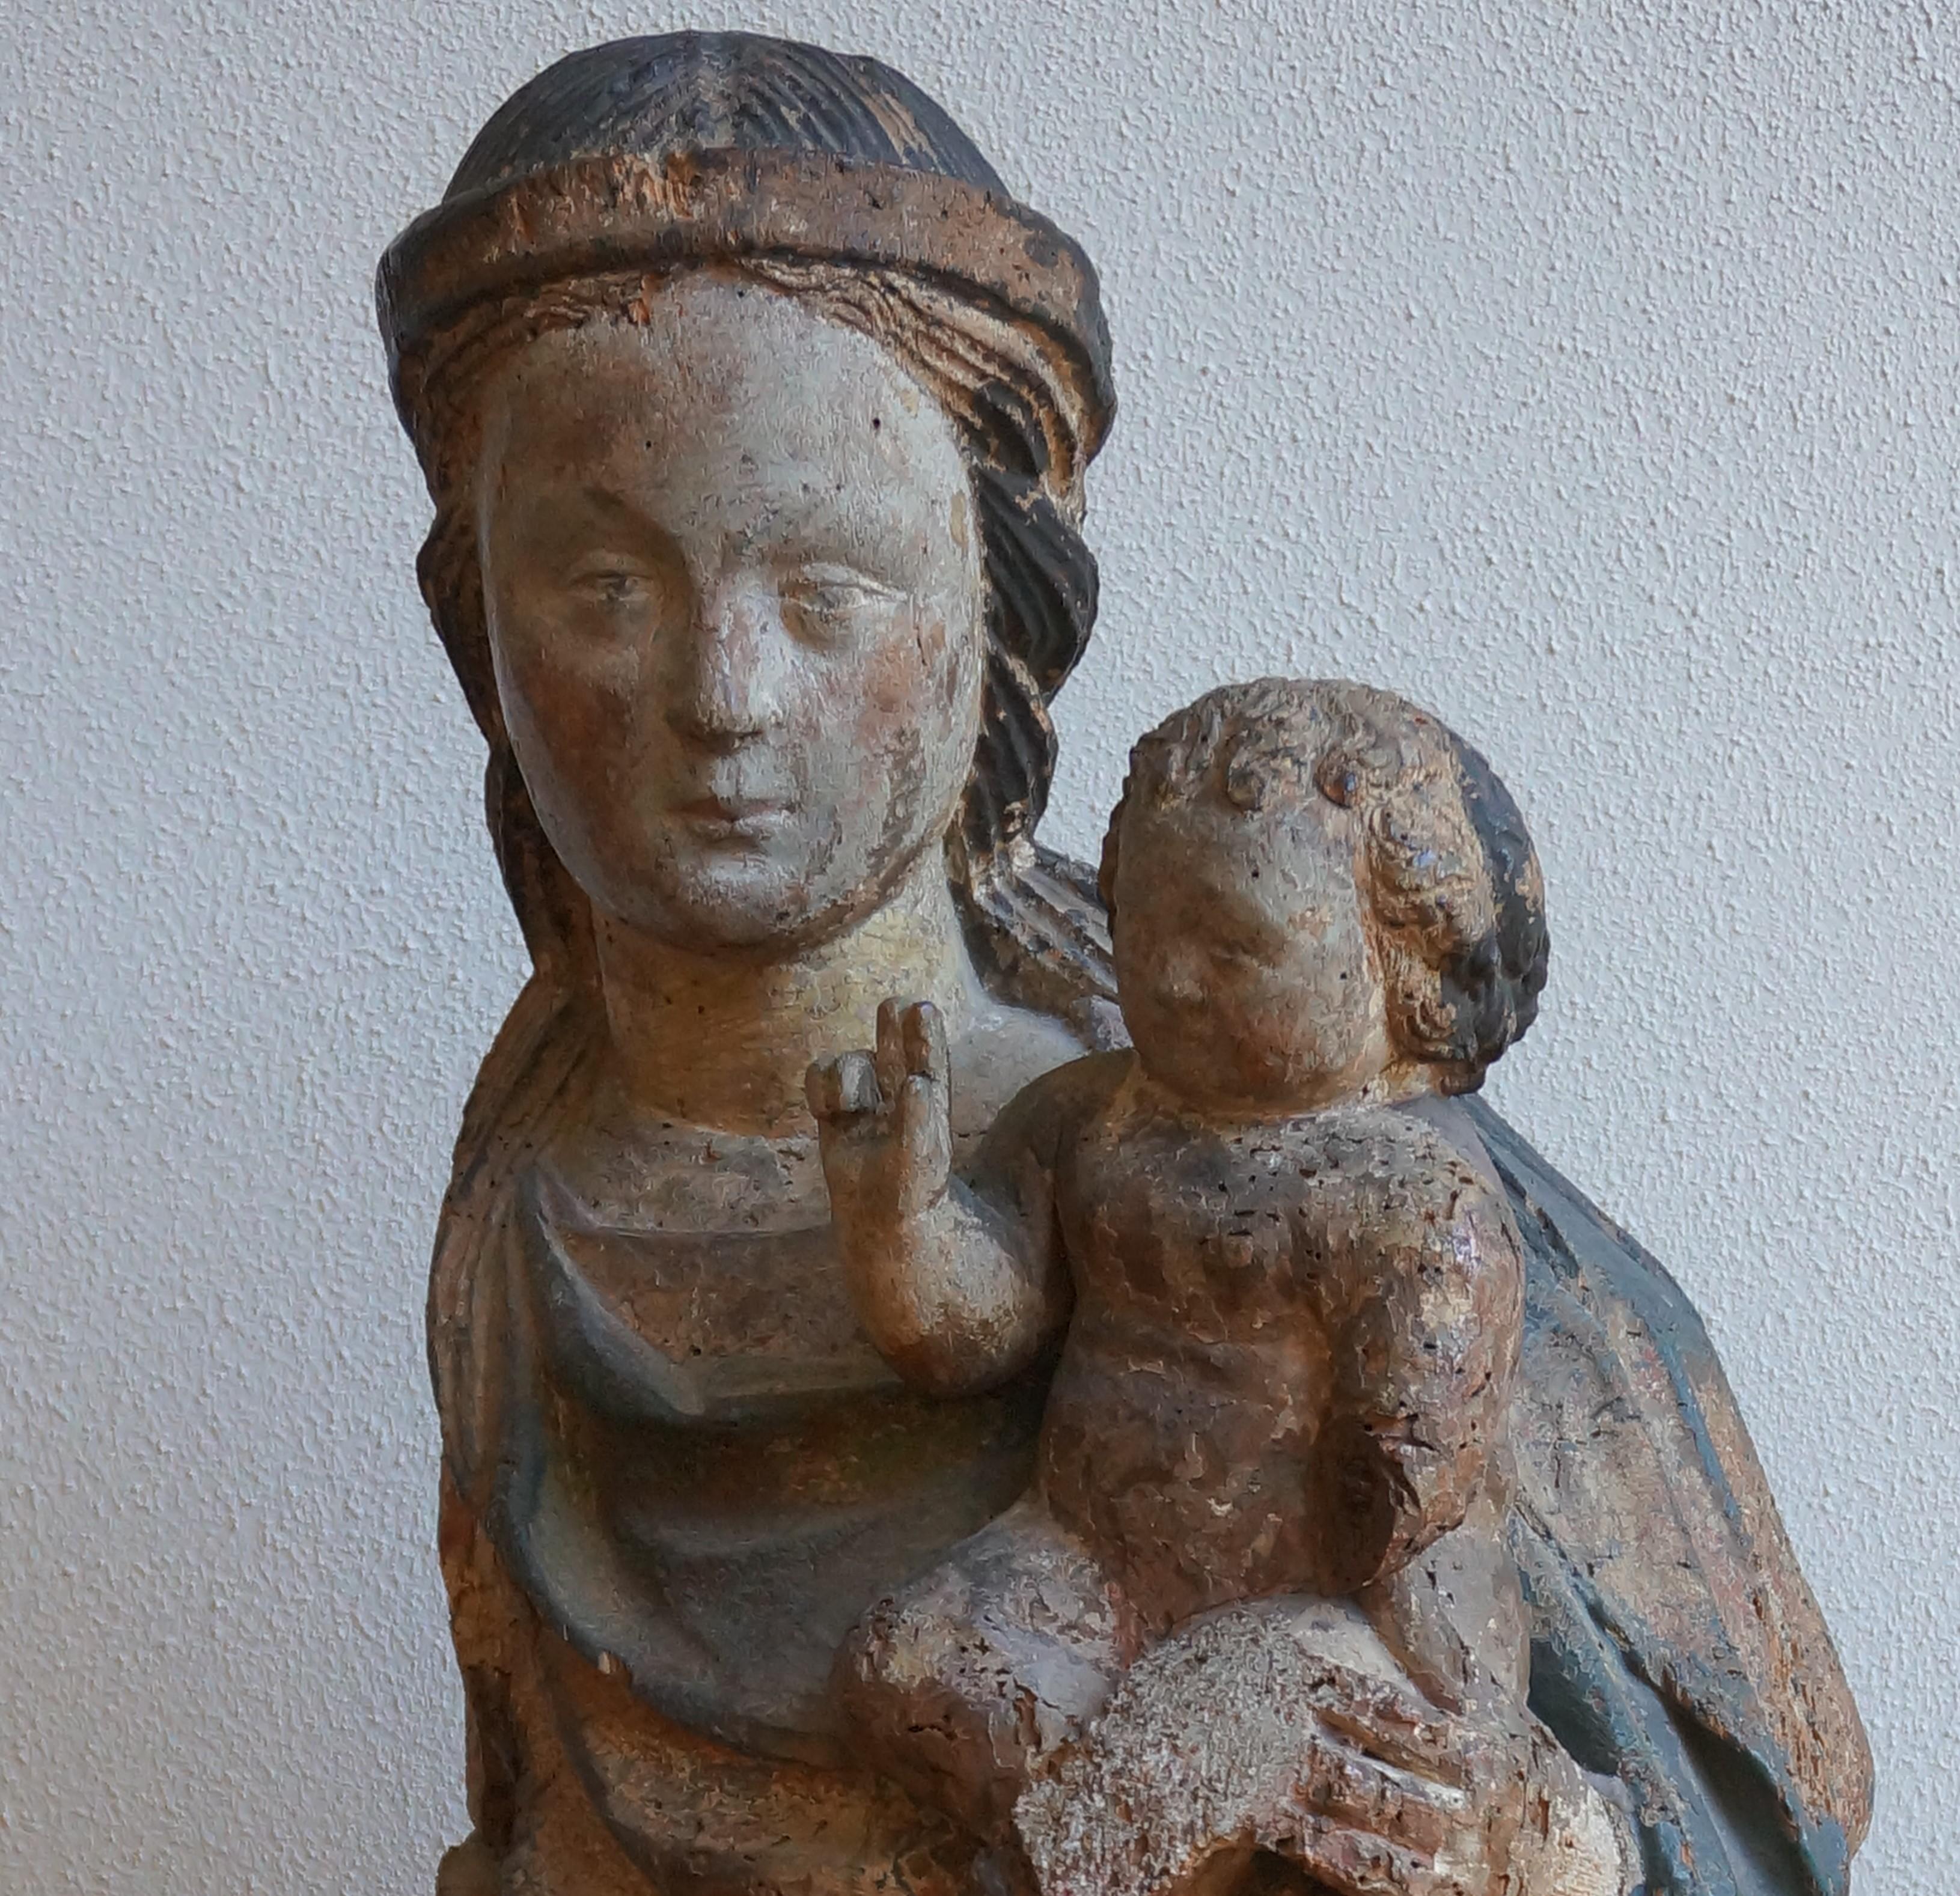 Wood Large medieval sculpture of the Virgin Mary and Child, France, ca. 1400, Gothic